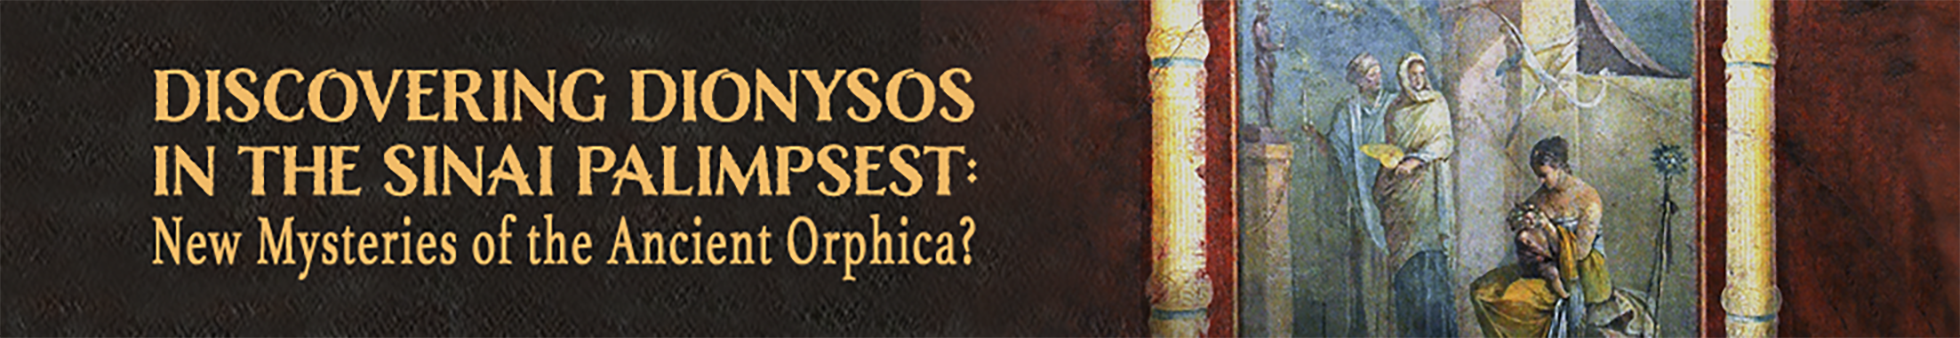 DISCOVERING DIONYSOS IN THE SINAI PALIMPSEST: New Mysteries of the Ancient Orphica?